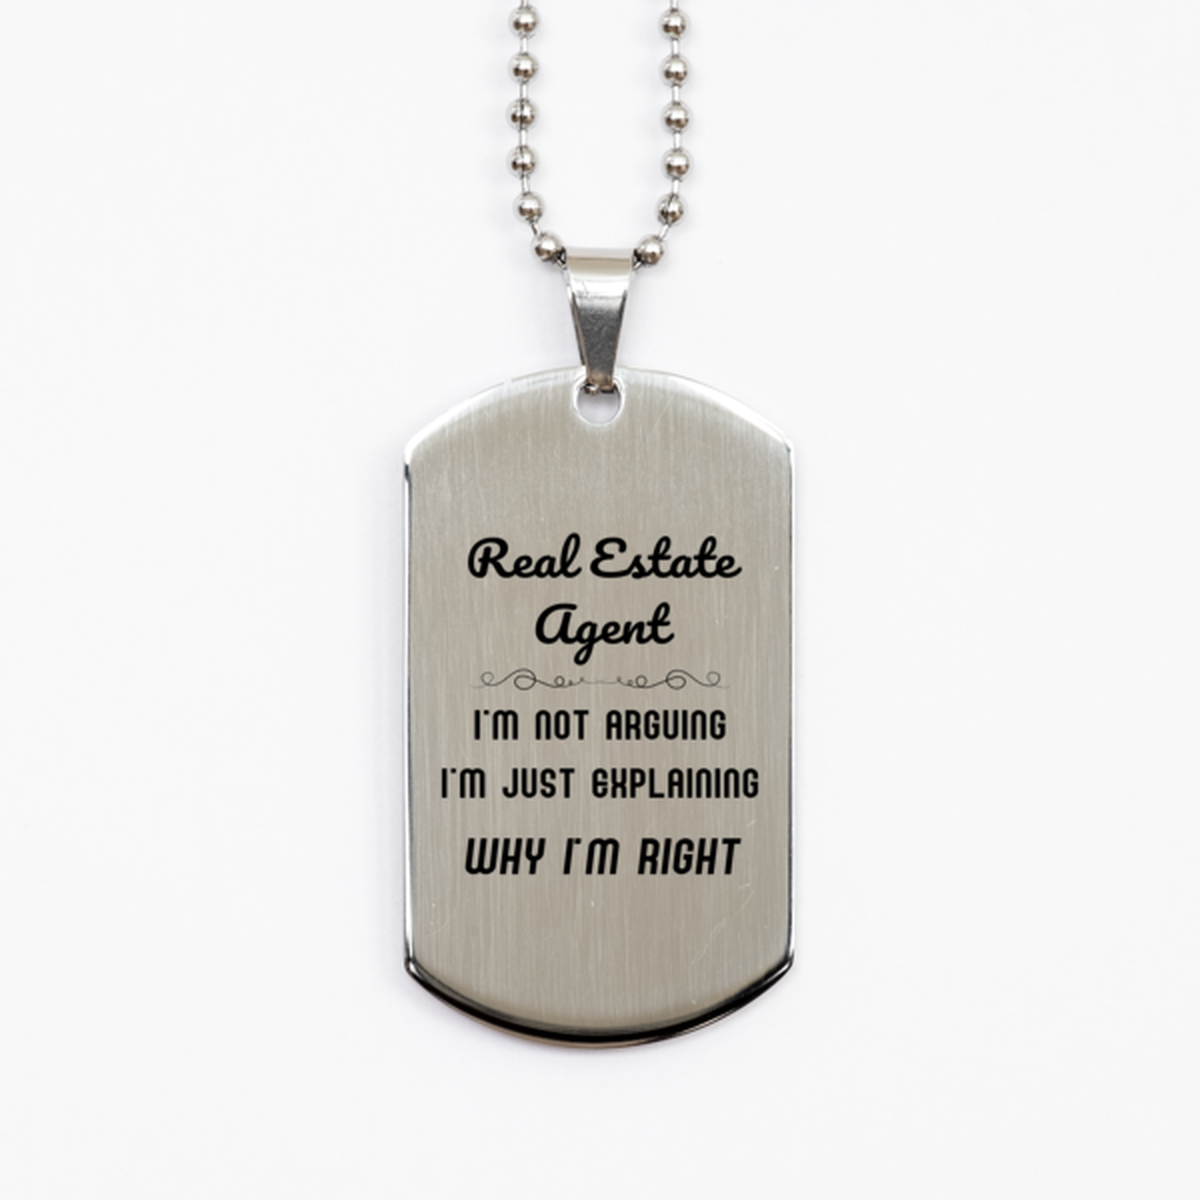 Real Estate Agent I'm not Arguing. I'm Just Explaining Why I'm RIGHT Silver Dog Tag, Funny Saying Quote Real Estate Agent Gifts For Real Estate Agent Graduation Birthday Christmas Gifts for Men Women Coworker